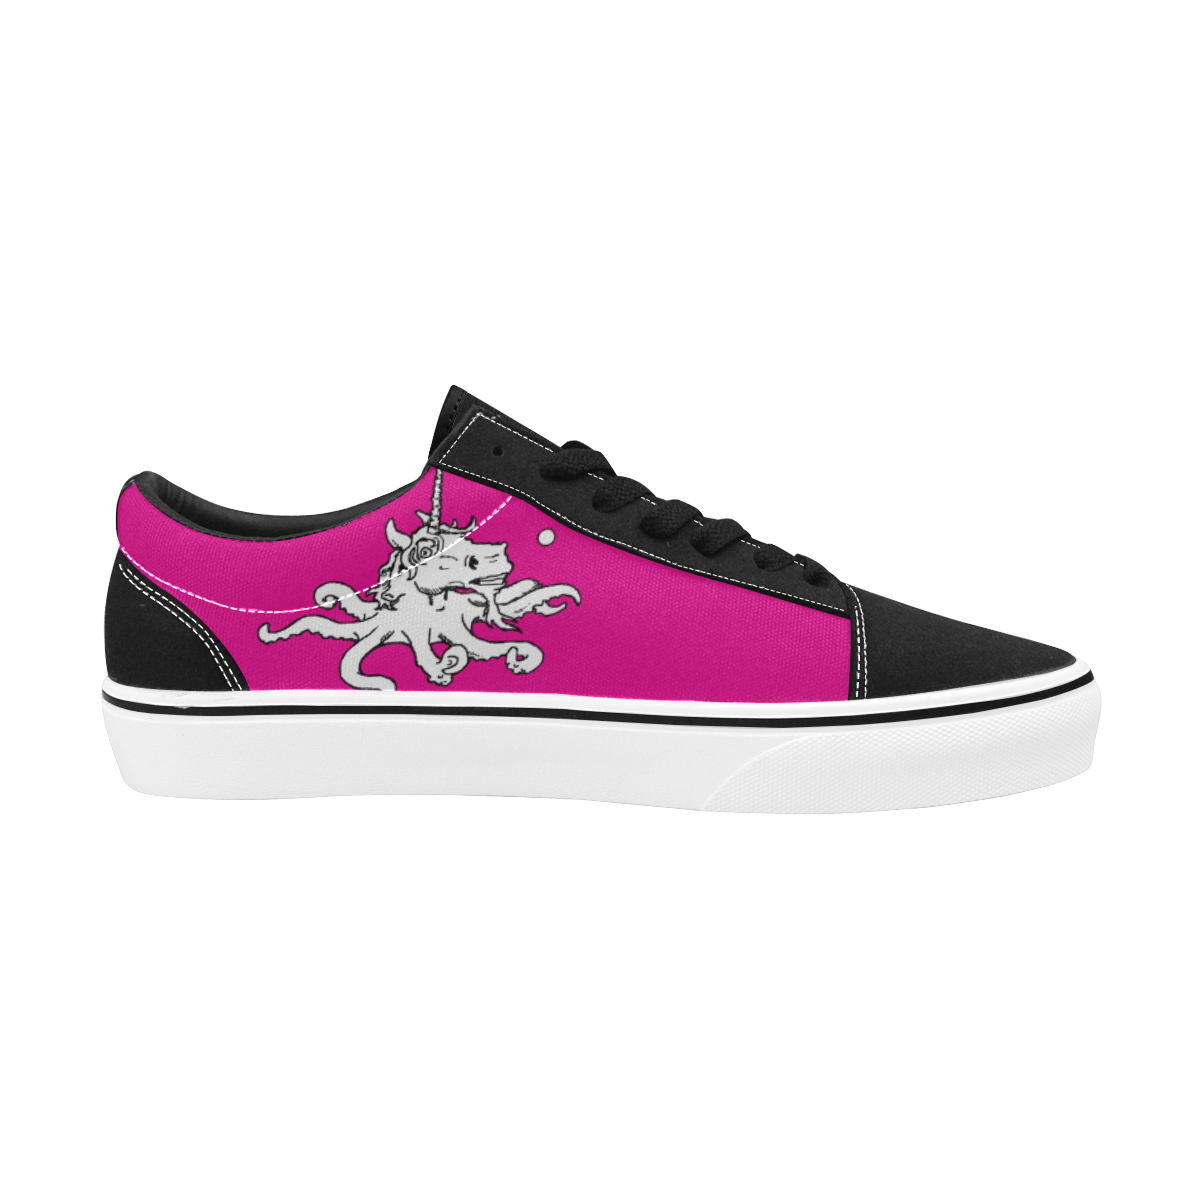 Tormented Octocorn Women's Low Top Skateboarding Shoes/Large (Model E001-2)